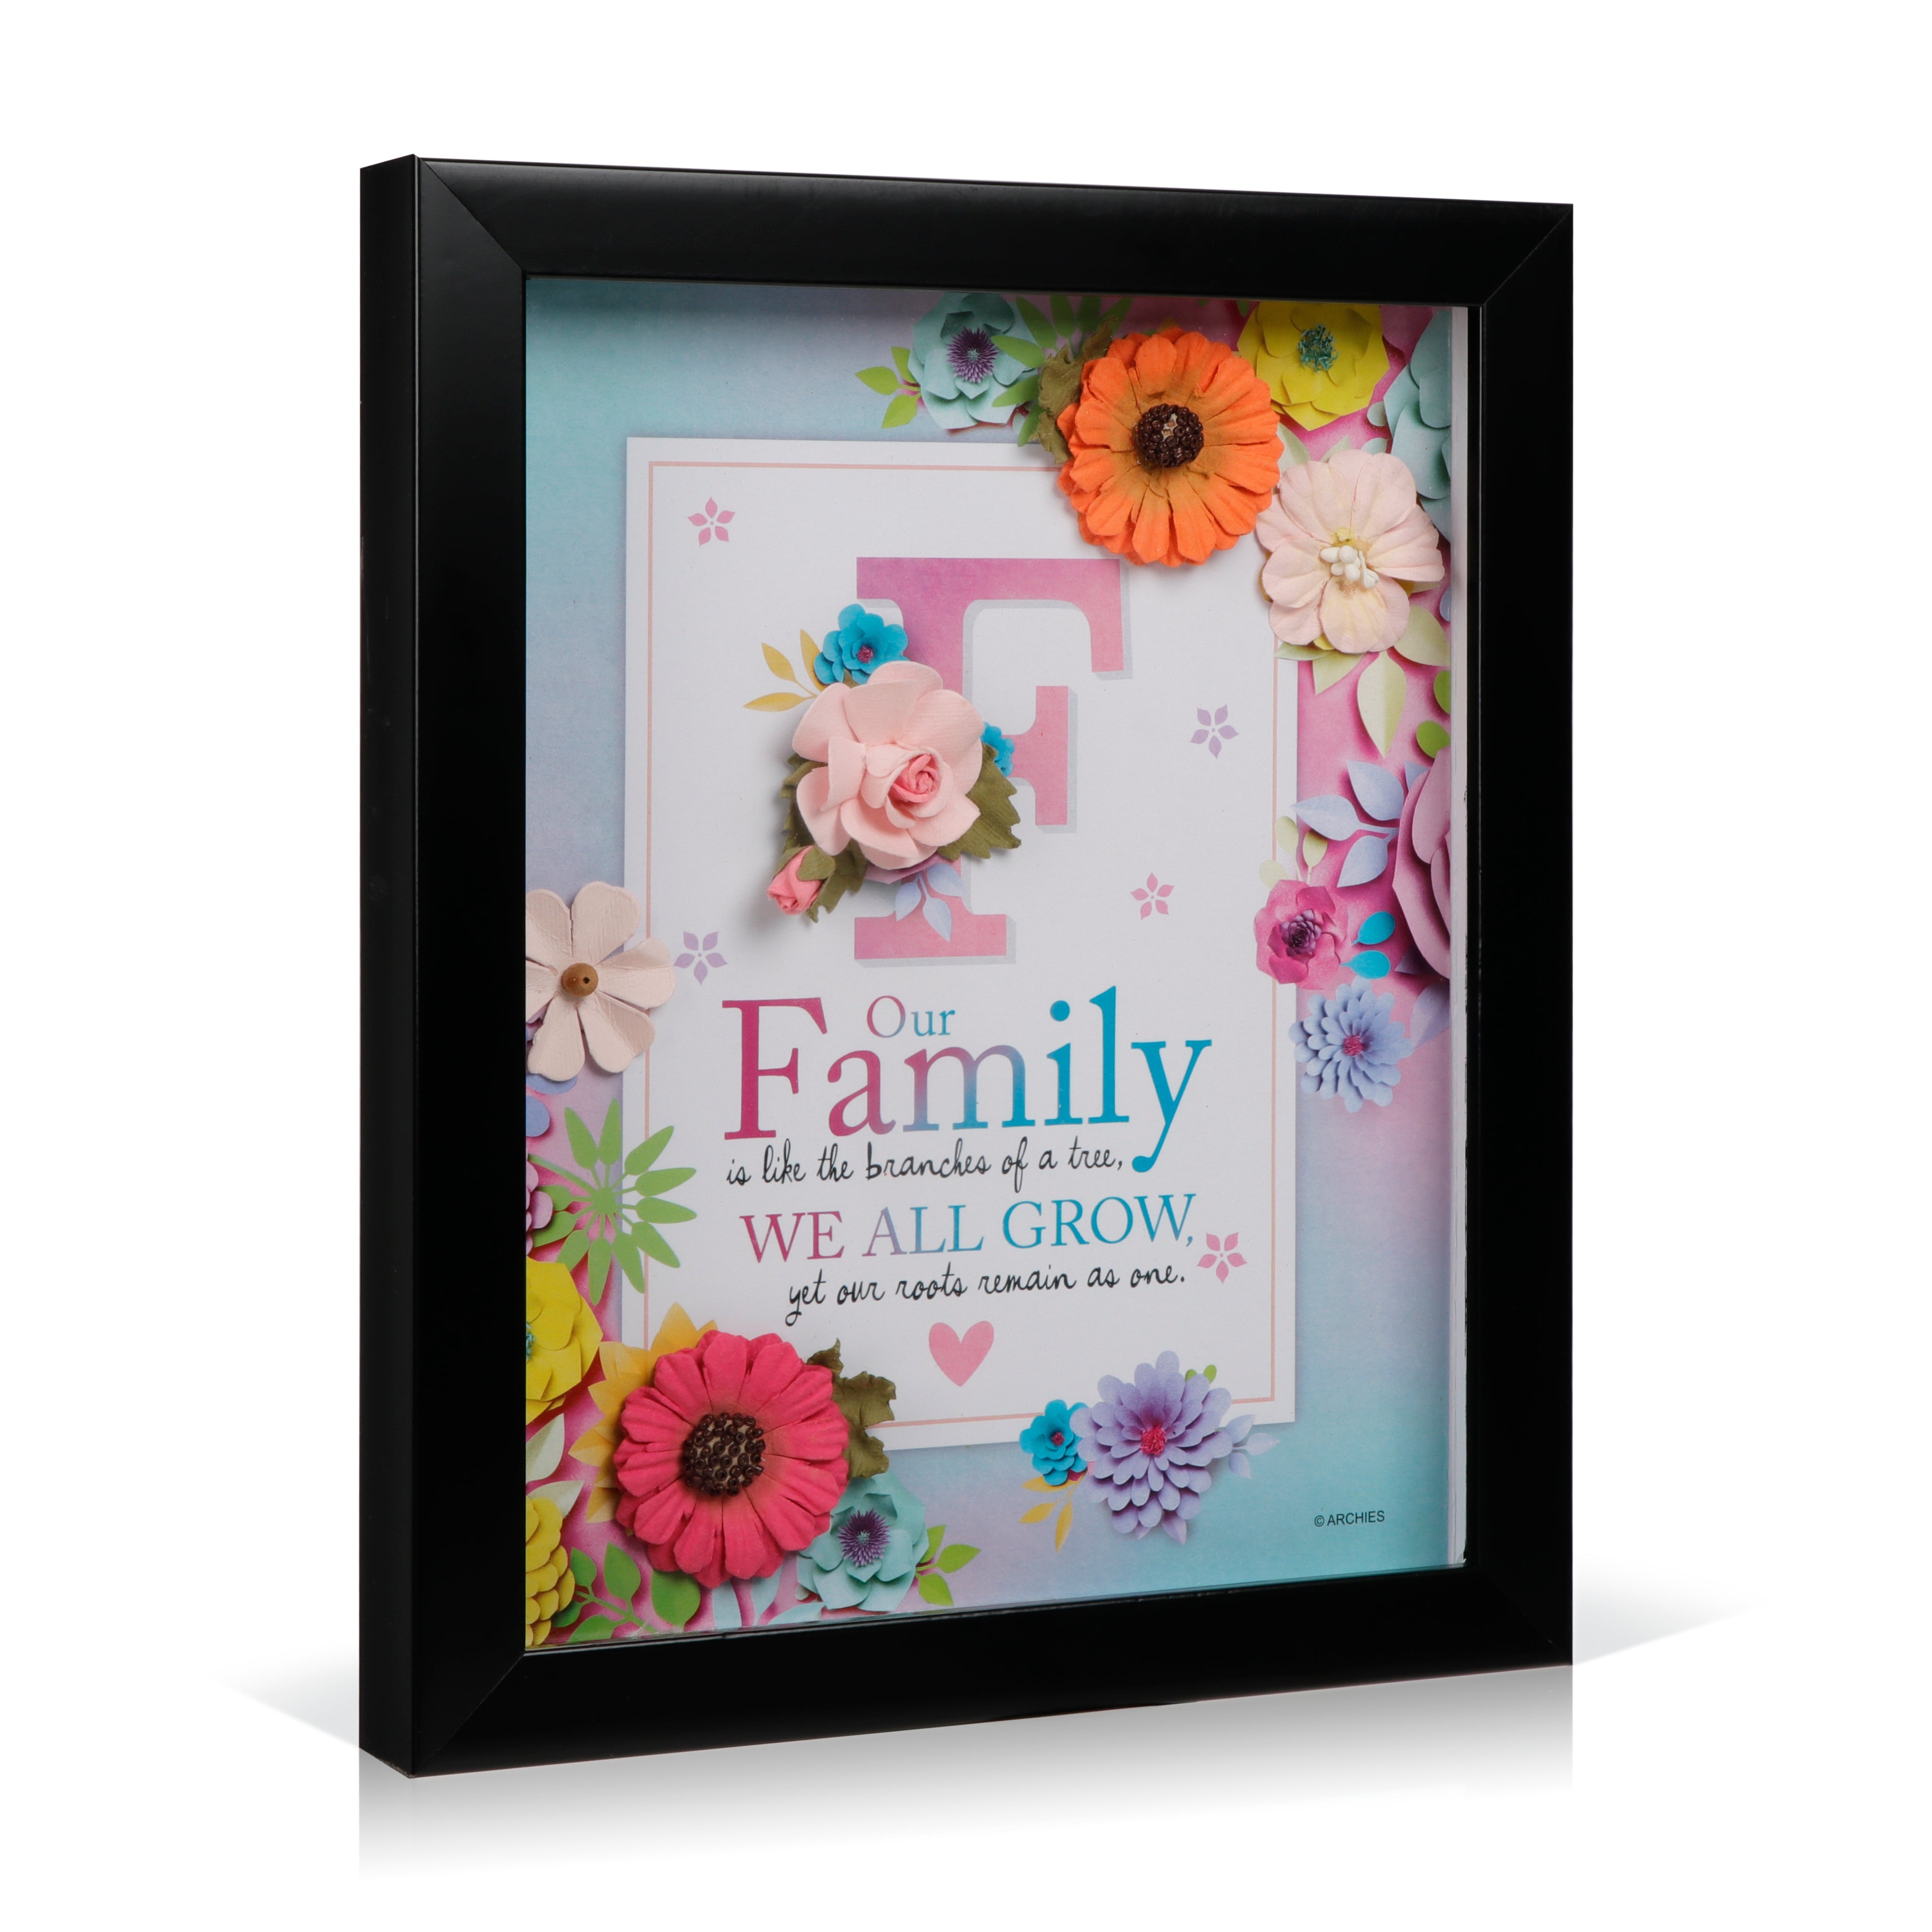 Archies | Archies KEEPSAKE QUOTATION - F.OUR FAMILY IS .... For gifting and Home décor 2